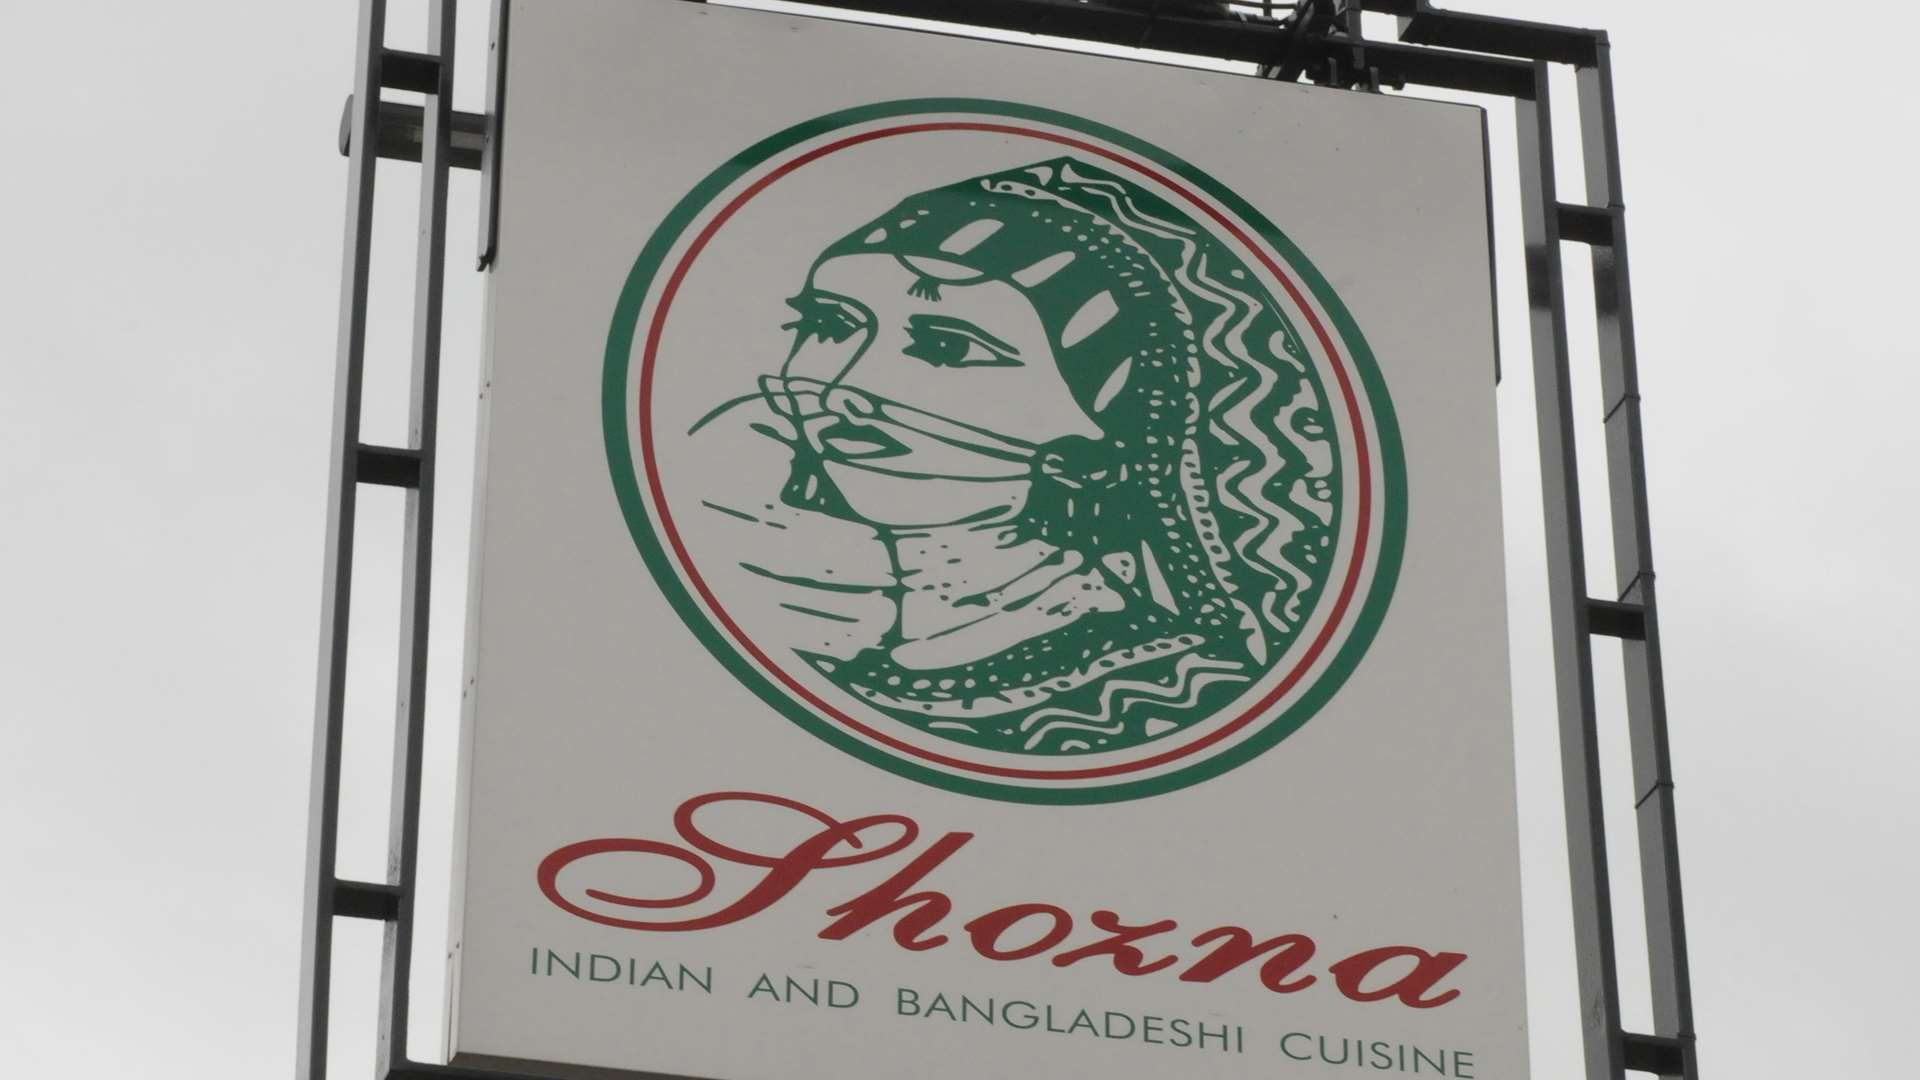 The incident happened at the Shozna Indian restaurant